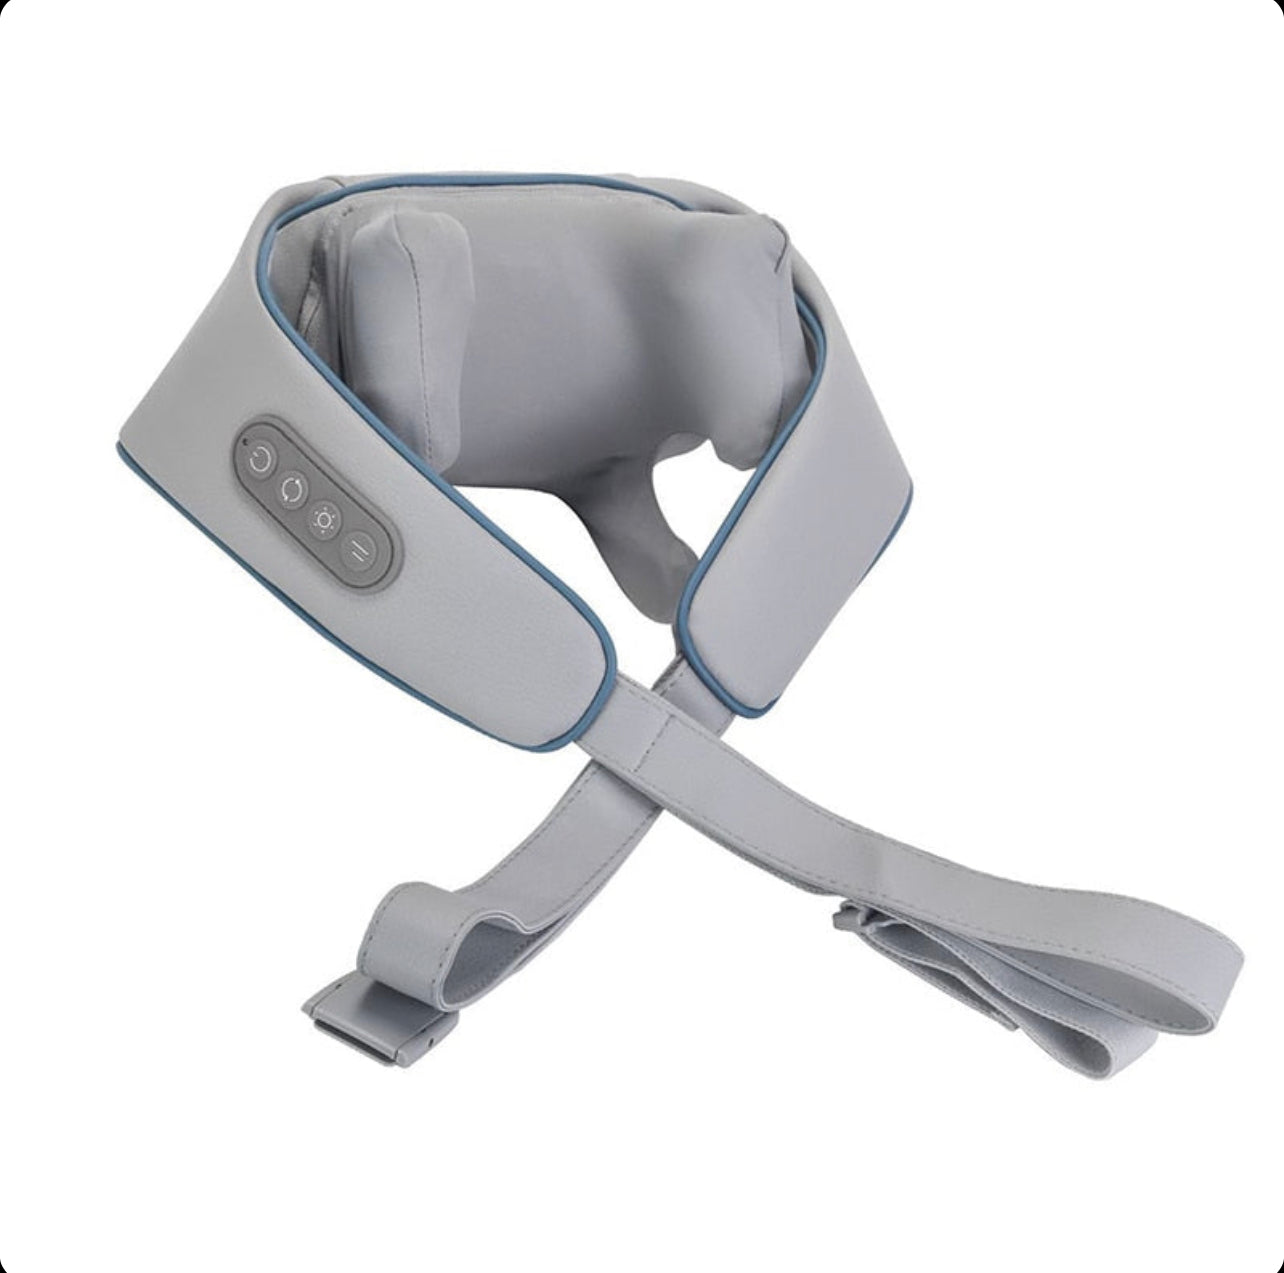 Stress Relieving And Soothing Neck, Shoulder And Waist Massager - [With Heat Compression Technology]